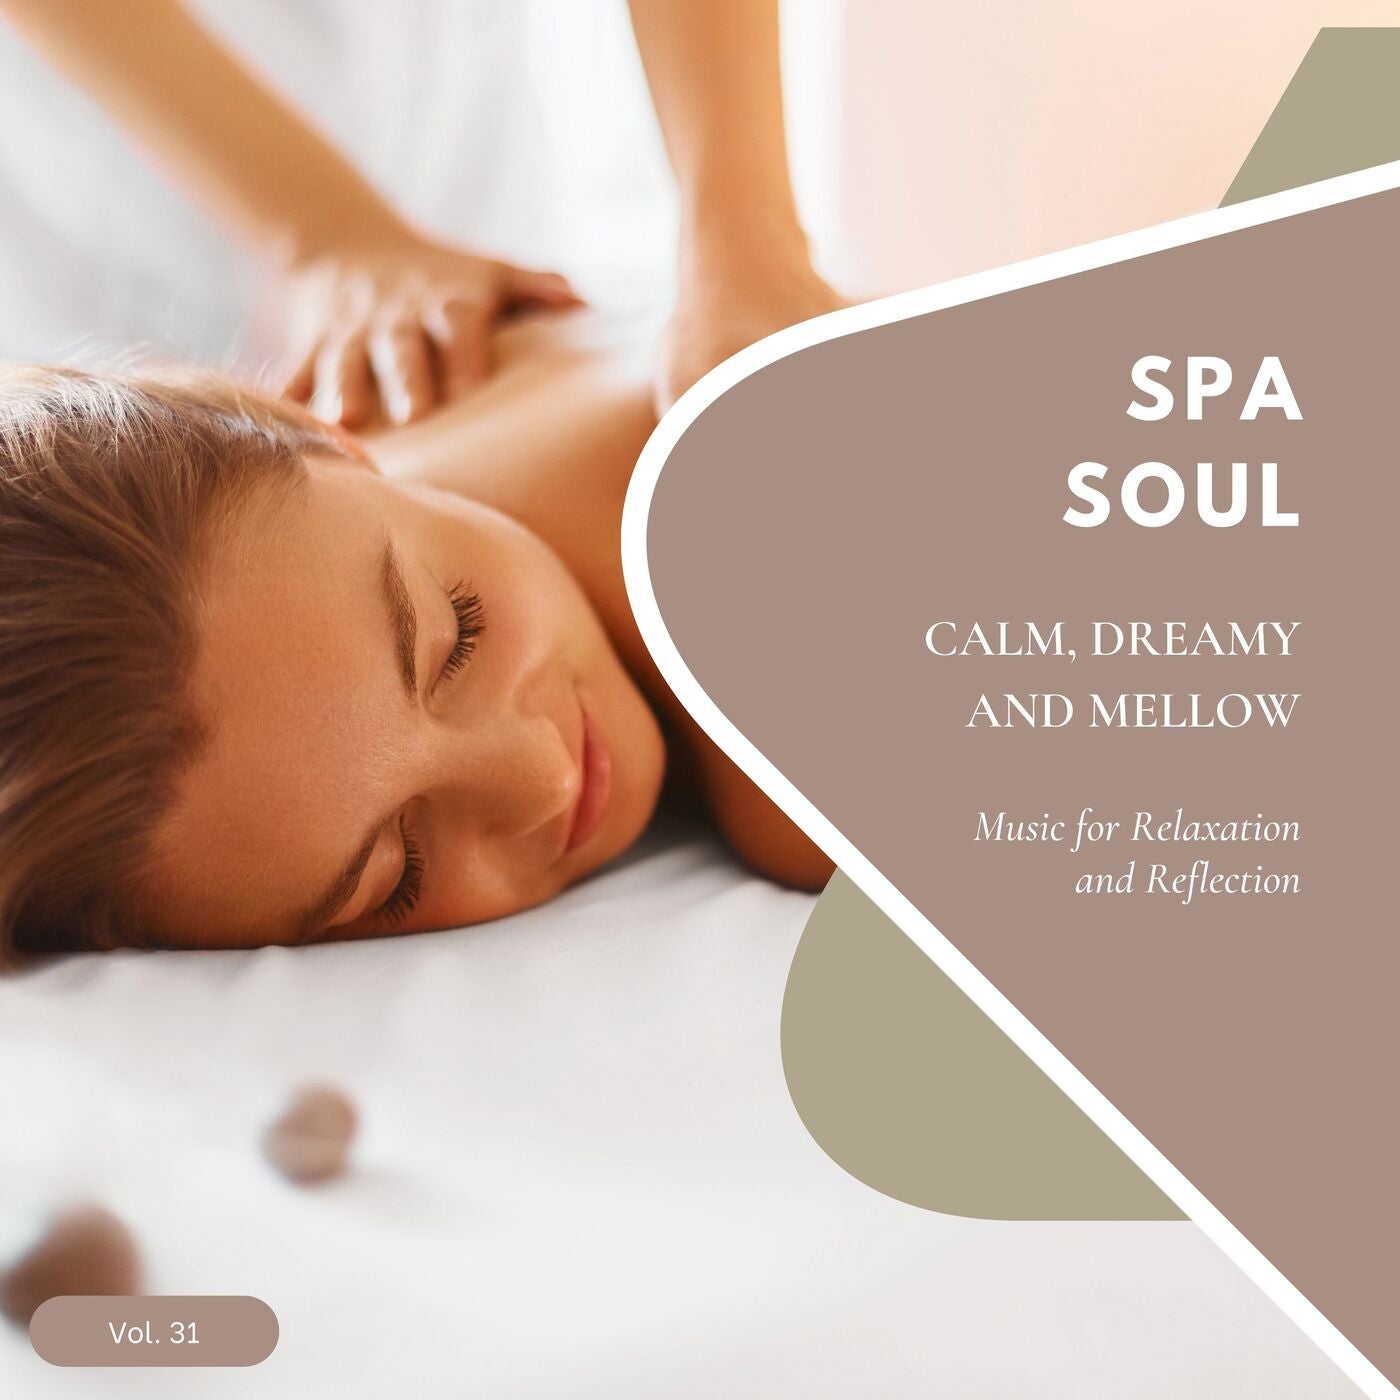 Spa Soul - Calm, Dreamy And Mellow Music For Relaxation And Reflextion, Vol. 31